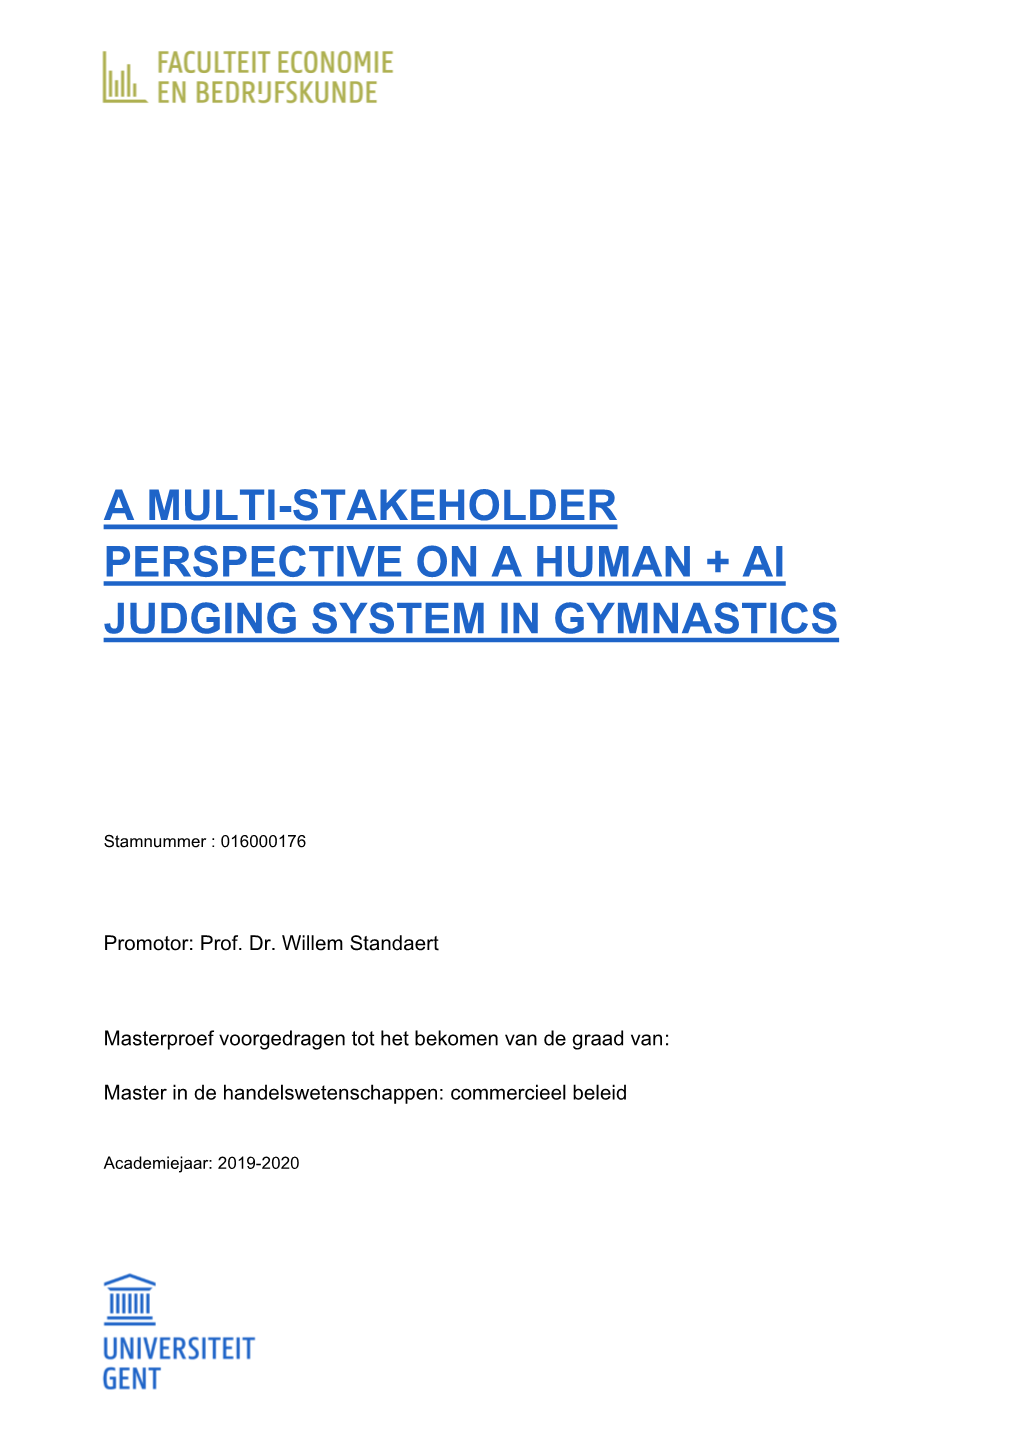 A Multi-Stakeholder Perspective on a Human + Ai Judging System in Gymnastics